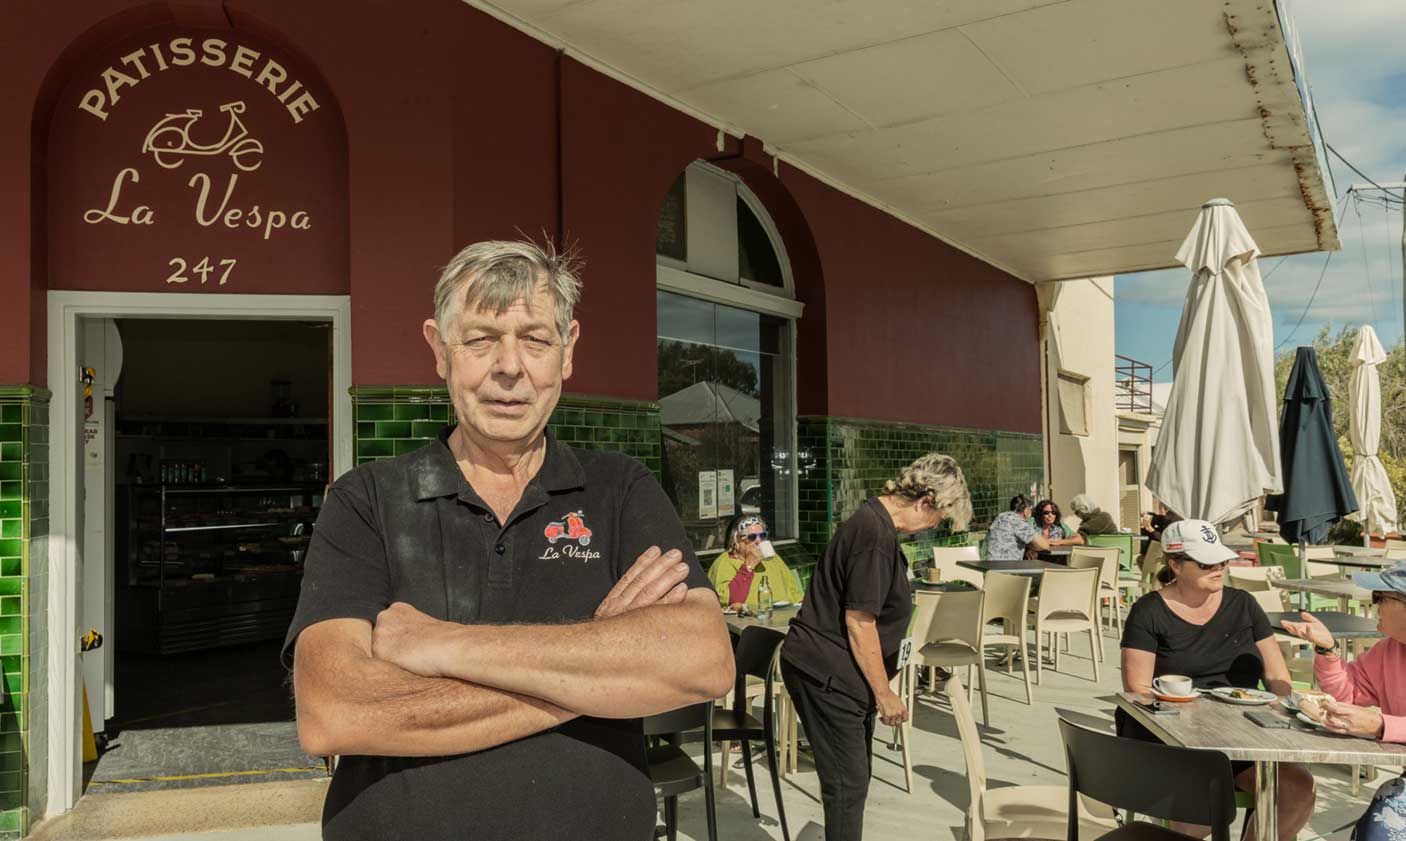 Business owner standing in front of their patisserie with customers using an alfresco area